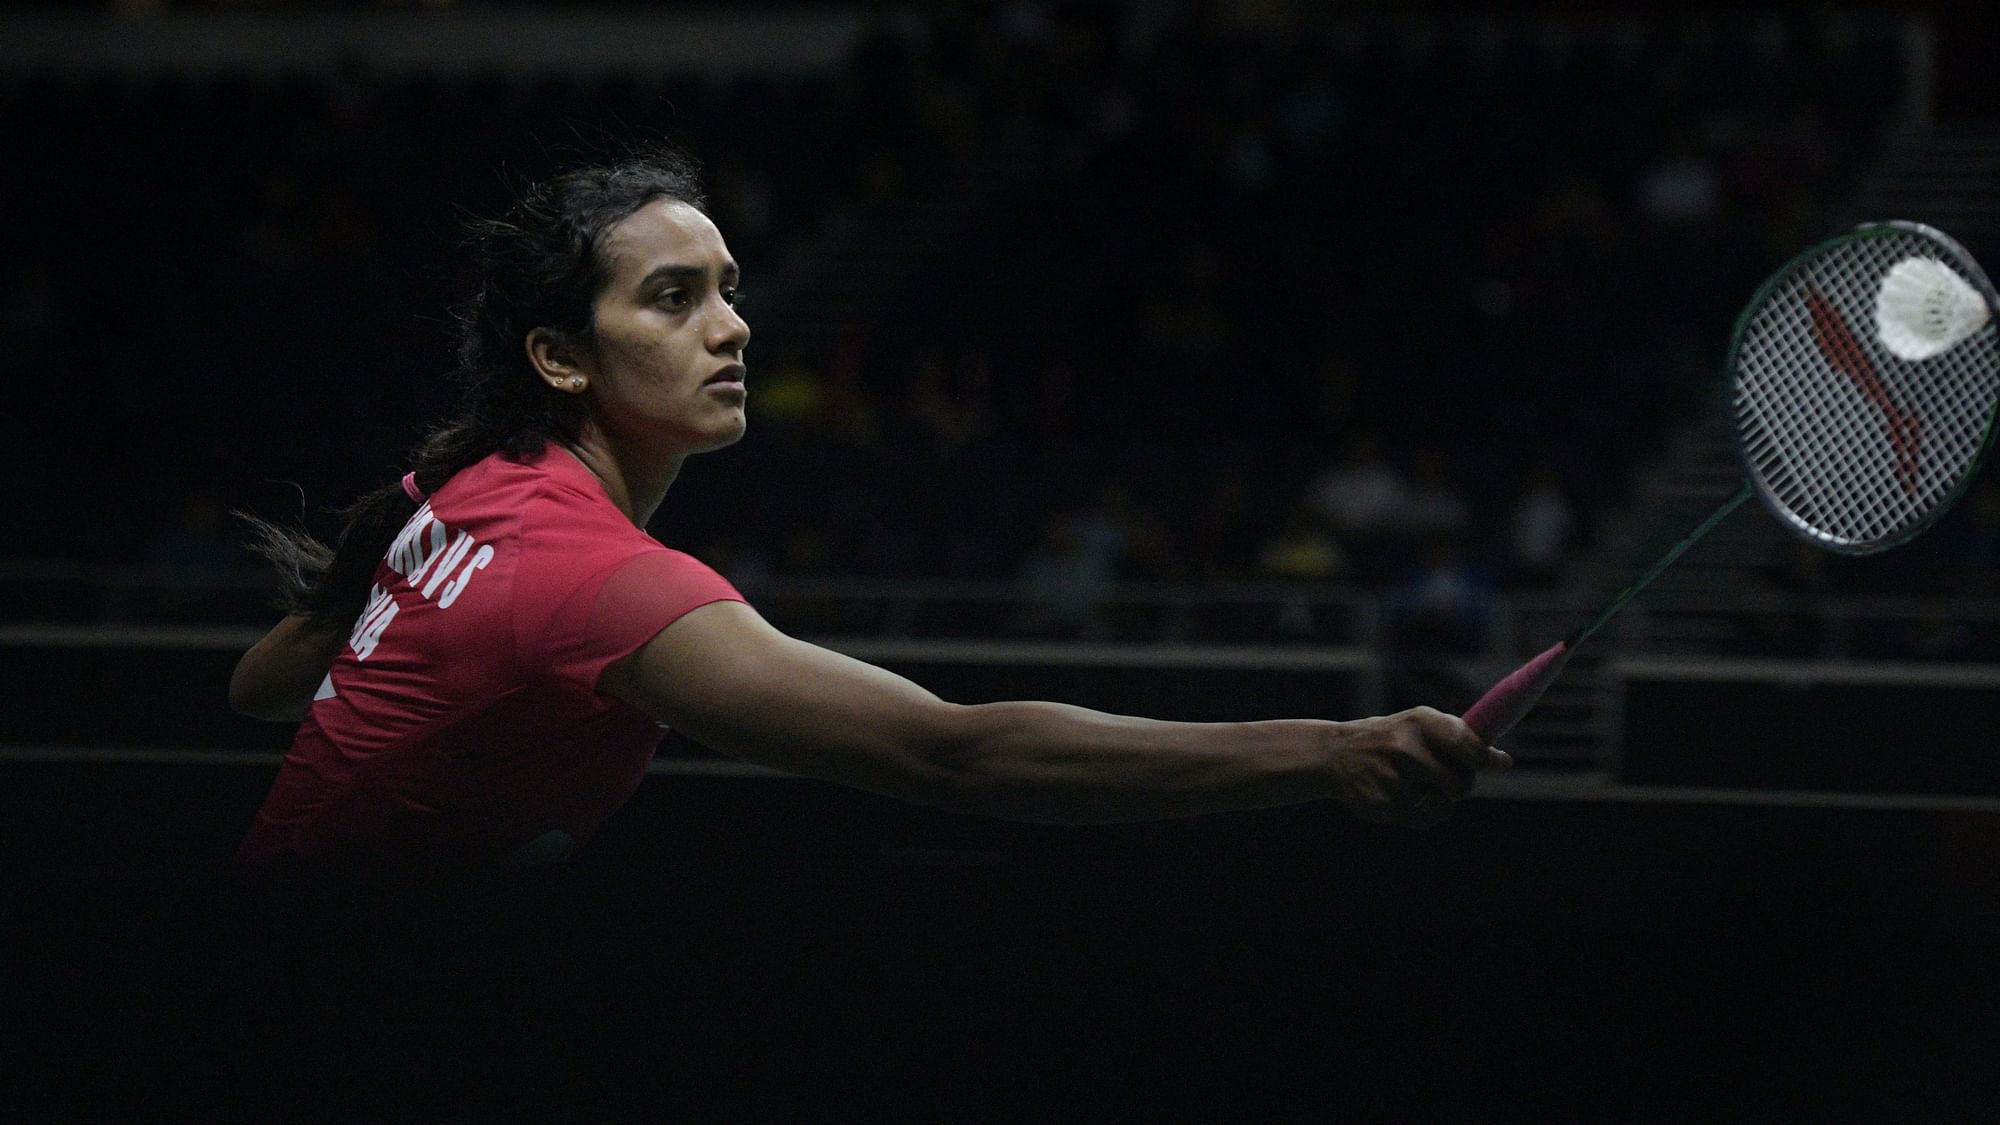 PV Sindhu talks about the time she has spent away from the game due to the lockdowns.